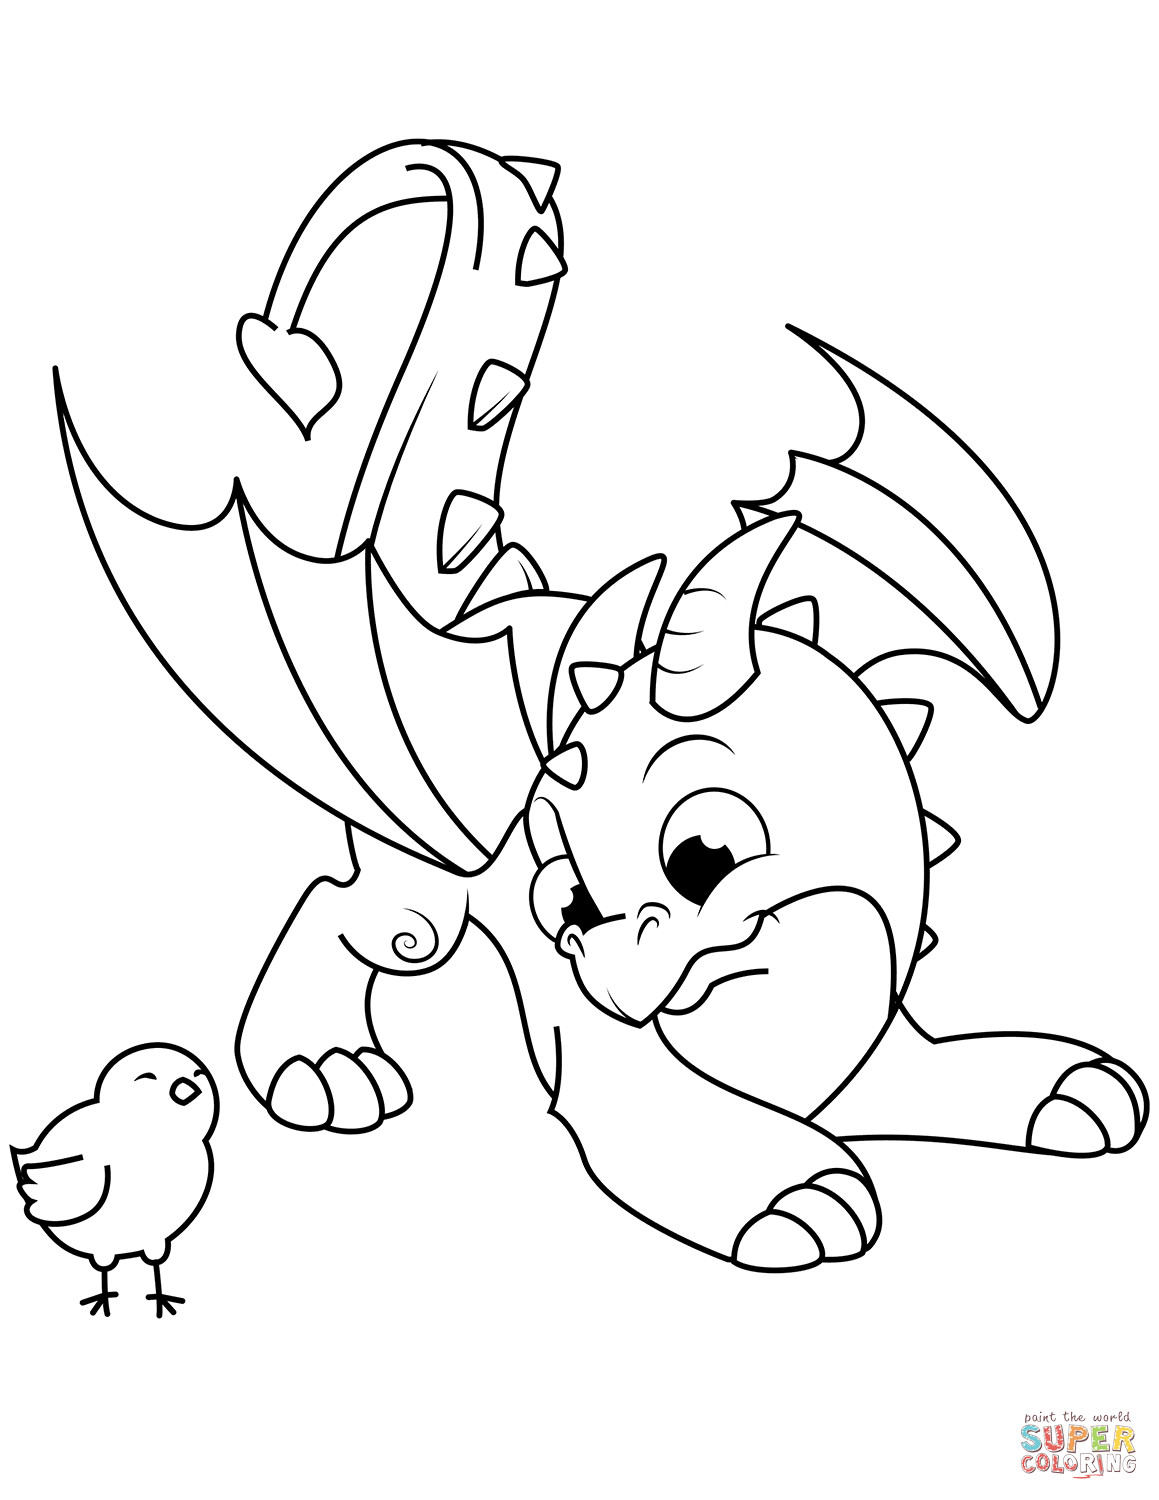 Printable Dragon Coloring Pages
 Cute Dragon and Chick coloring page